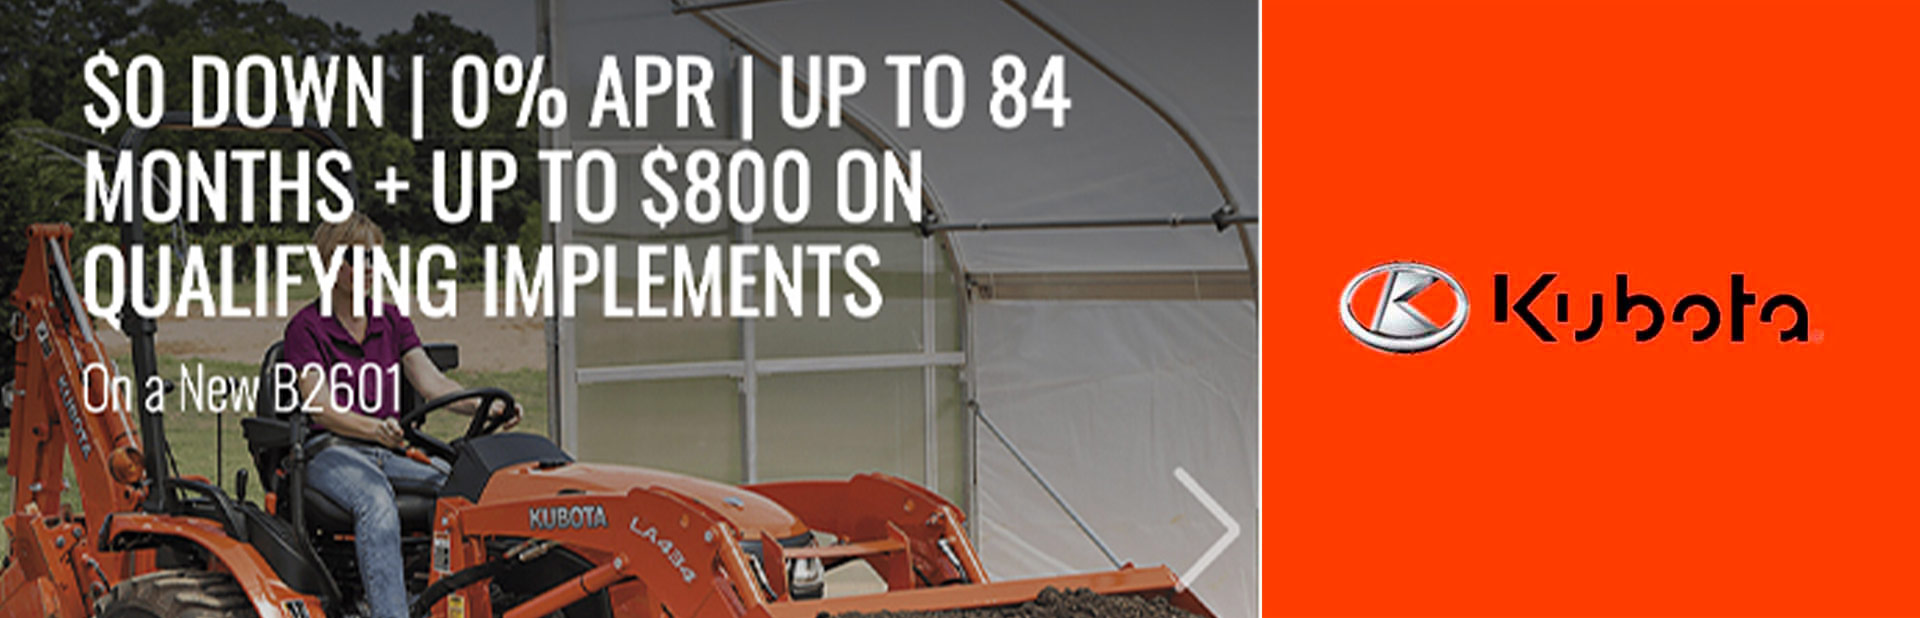 KUBOTA B2301/B2601 - NEW TRACTOR PURCHASE SPECIAL OFFER